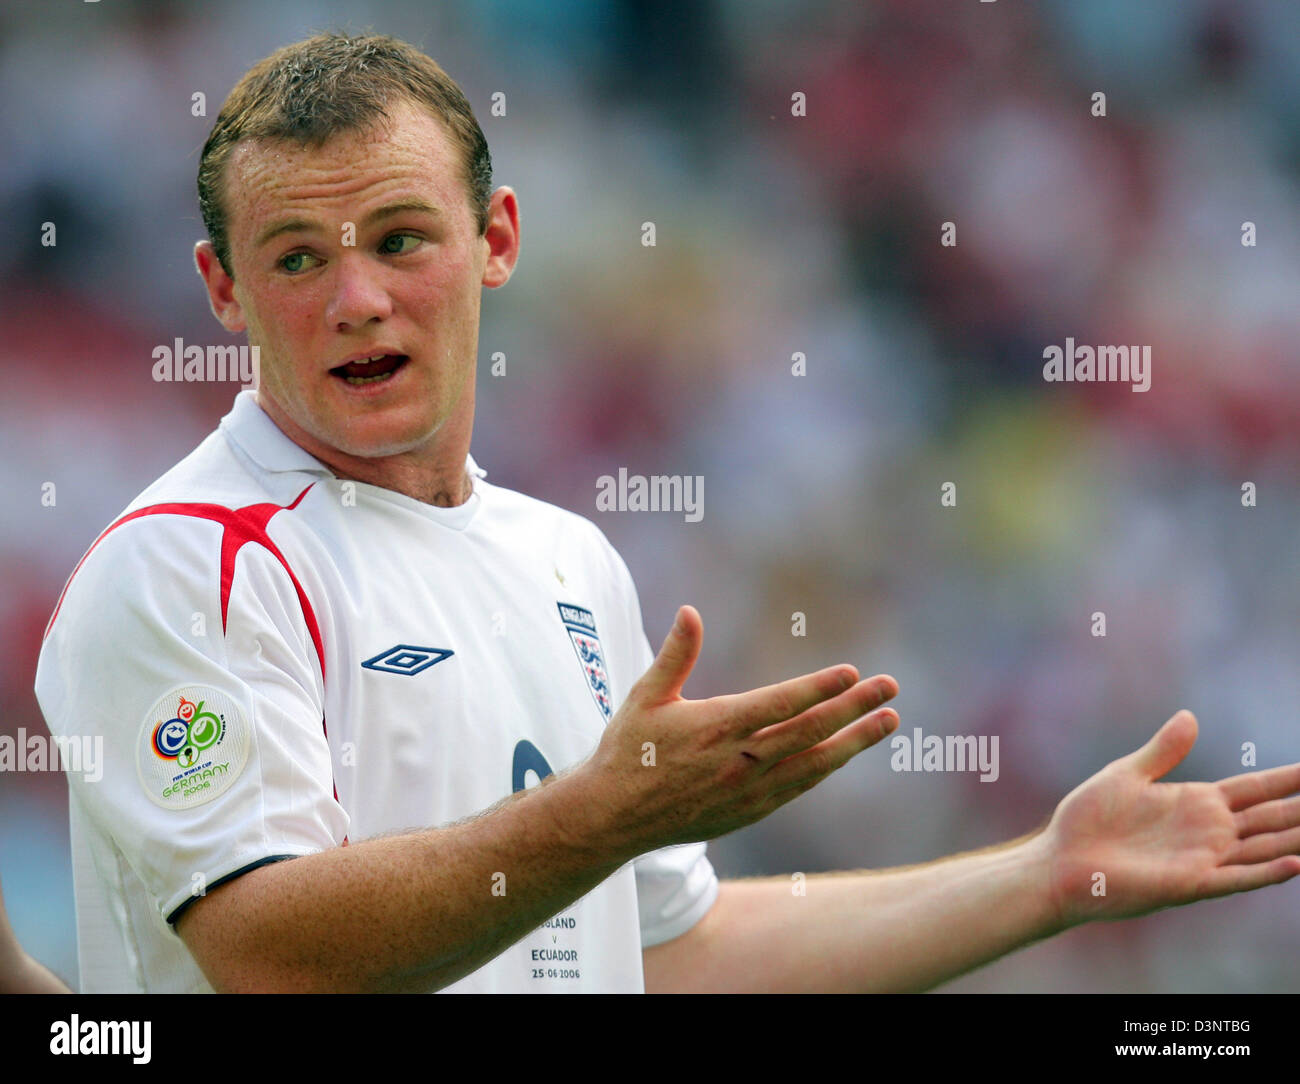 England national soccer player Wayne Rooney from Manchester United  gestures during the FIFA World Cup 2006 second round match against Ecuador in Stuttgart, Germany, Sunday, 25 June 2006. England advanced to the quarter-finals with a 1-0 victory. Photo: Arne Dedert Stock Photo